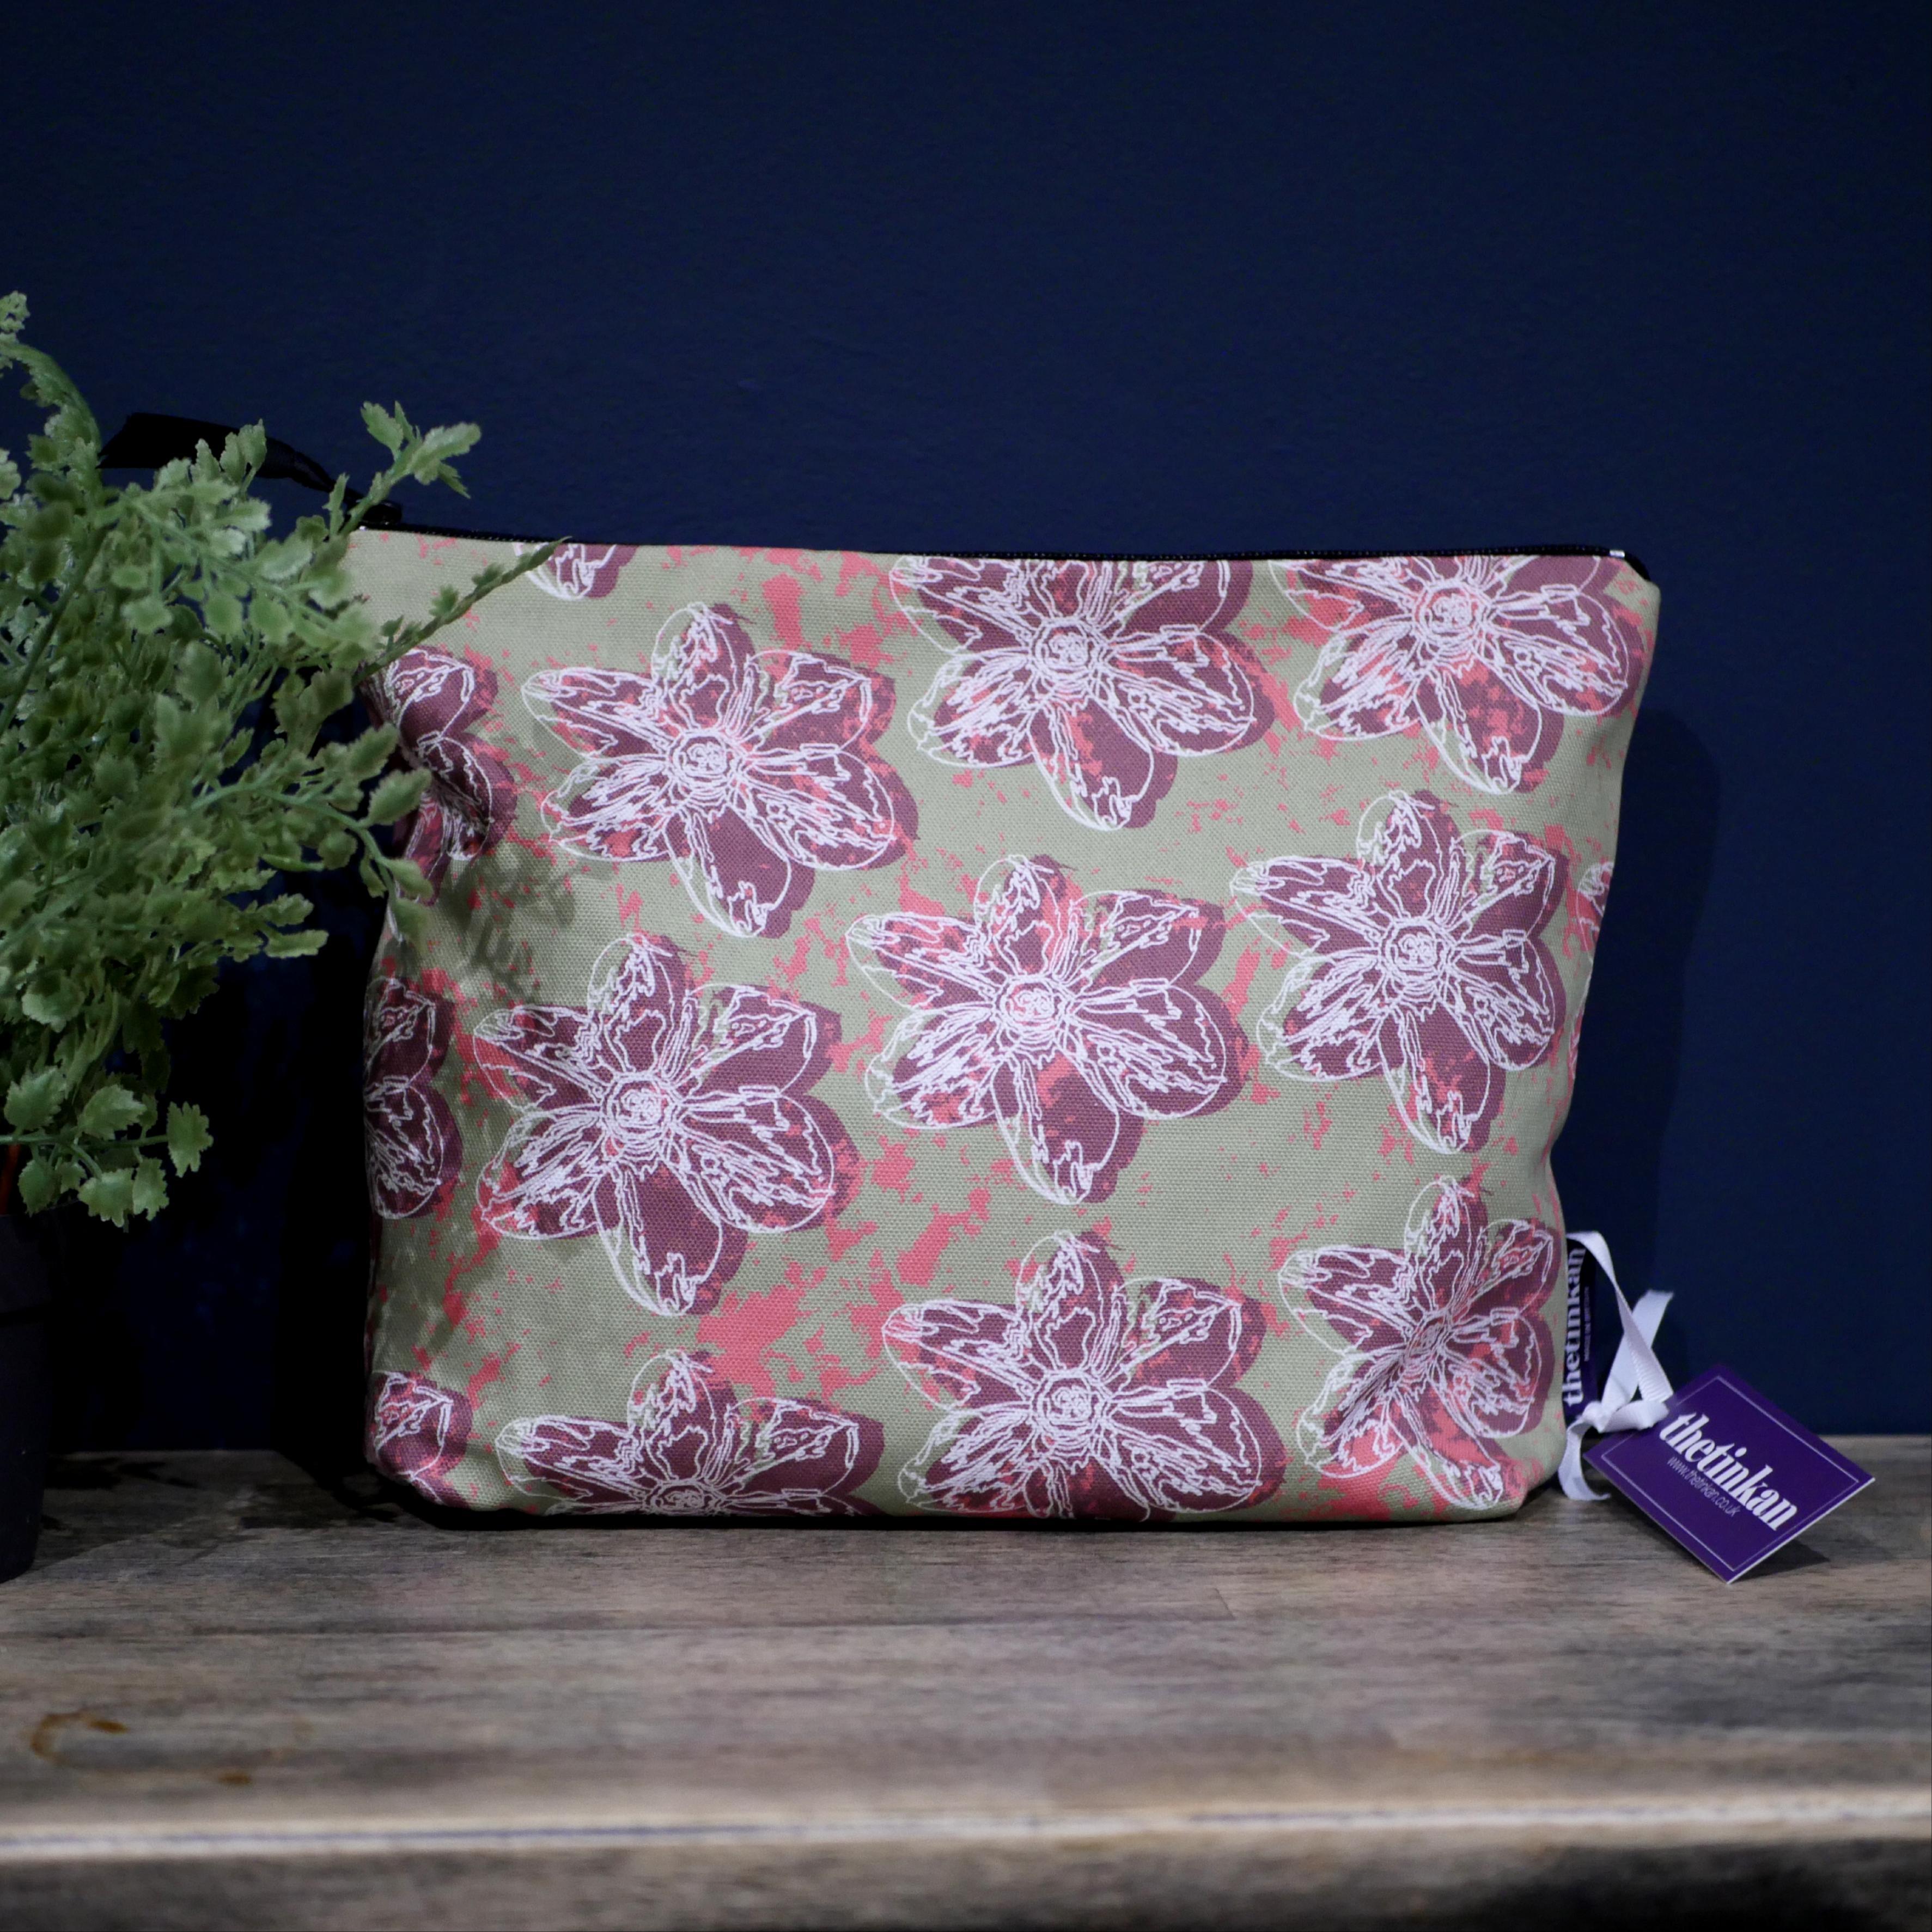 Dark red flower with a matching coloured reverse, set on an olive green background with a salmon pink colour splash. Designed by thetinkan, the flower splash travel beauty washbag featuring the white traced outline of a?narcissus flower is made from panama cotton with black waterproof lining and matching black sturdy zip. Generously sized for all your travel or home needs.? VIEW PRODUCT >>